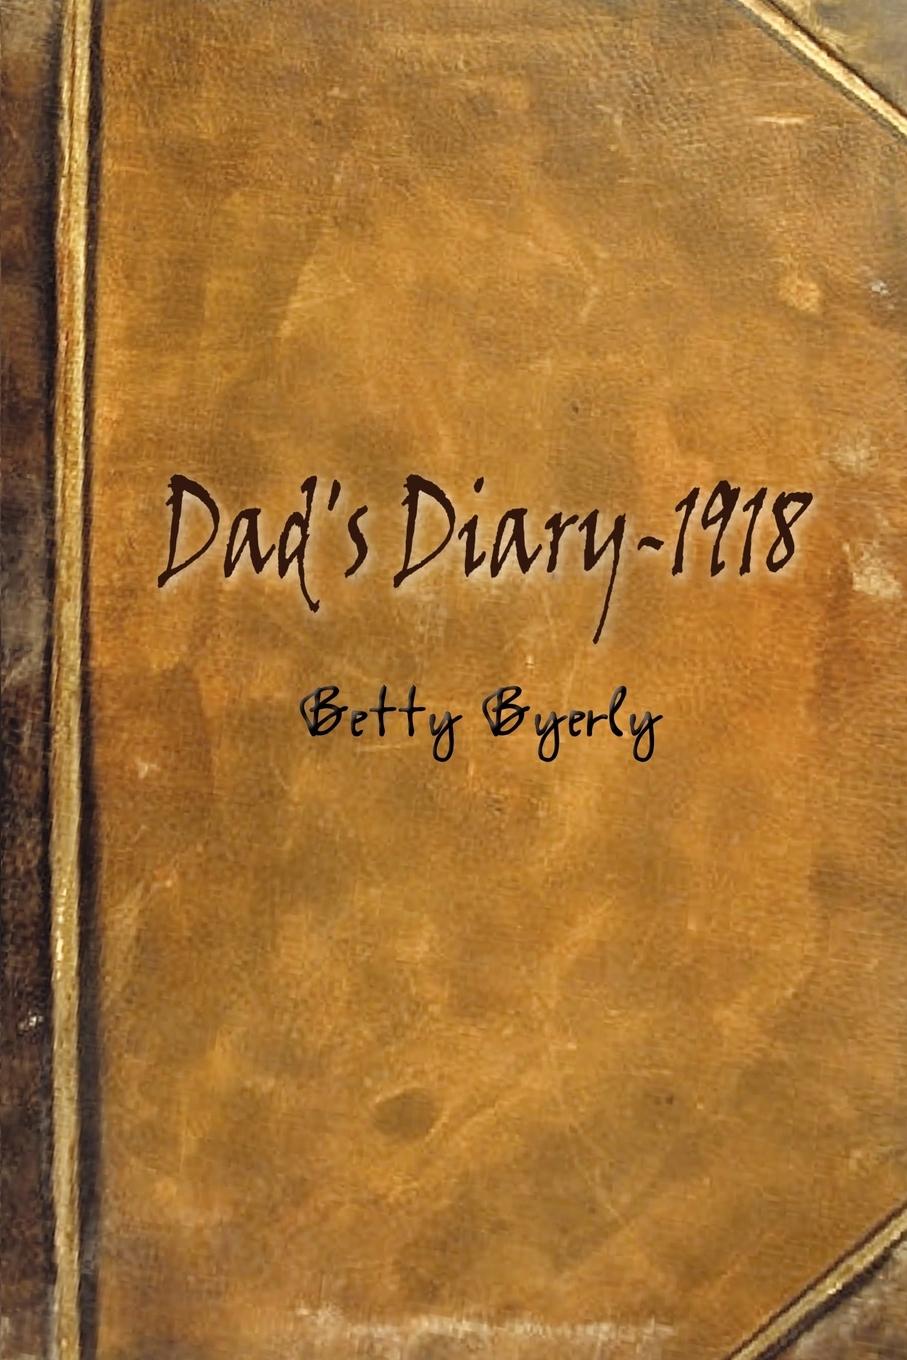 Dad\\'s Diary-191 - Byerly, Betty